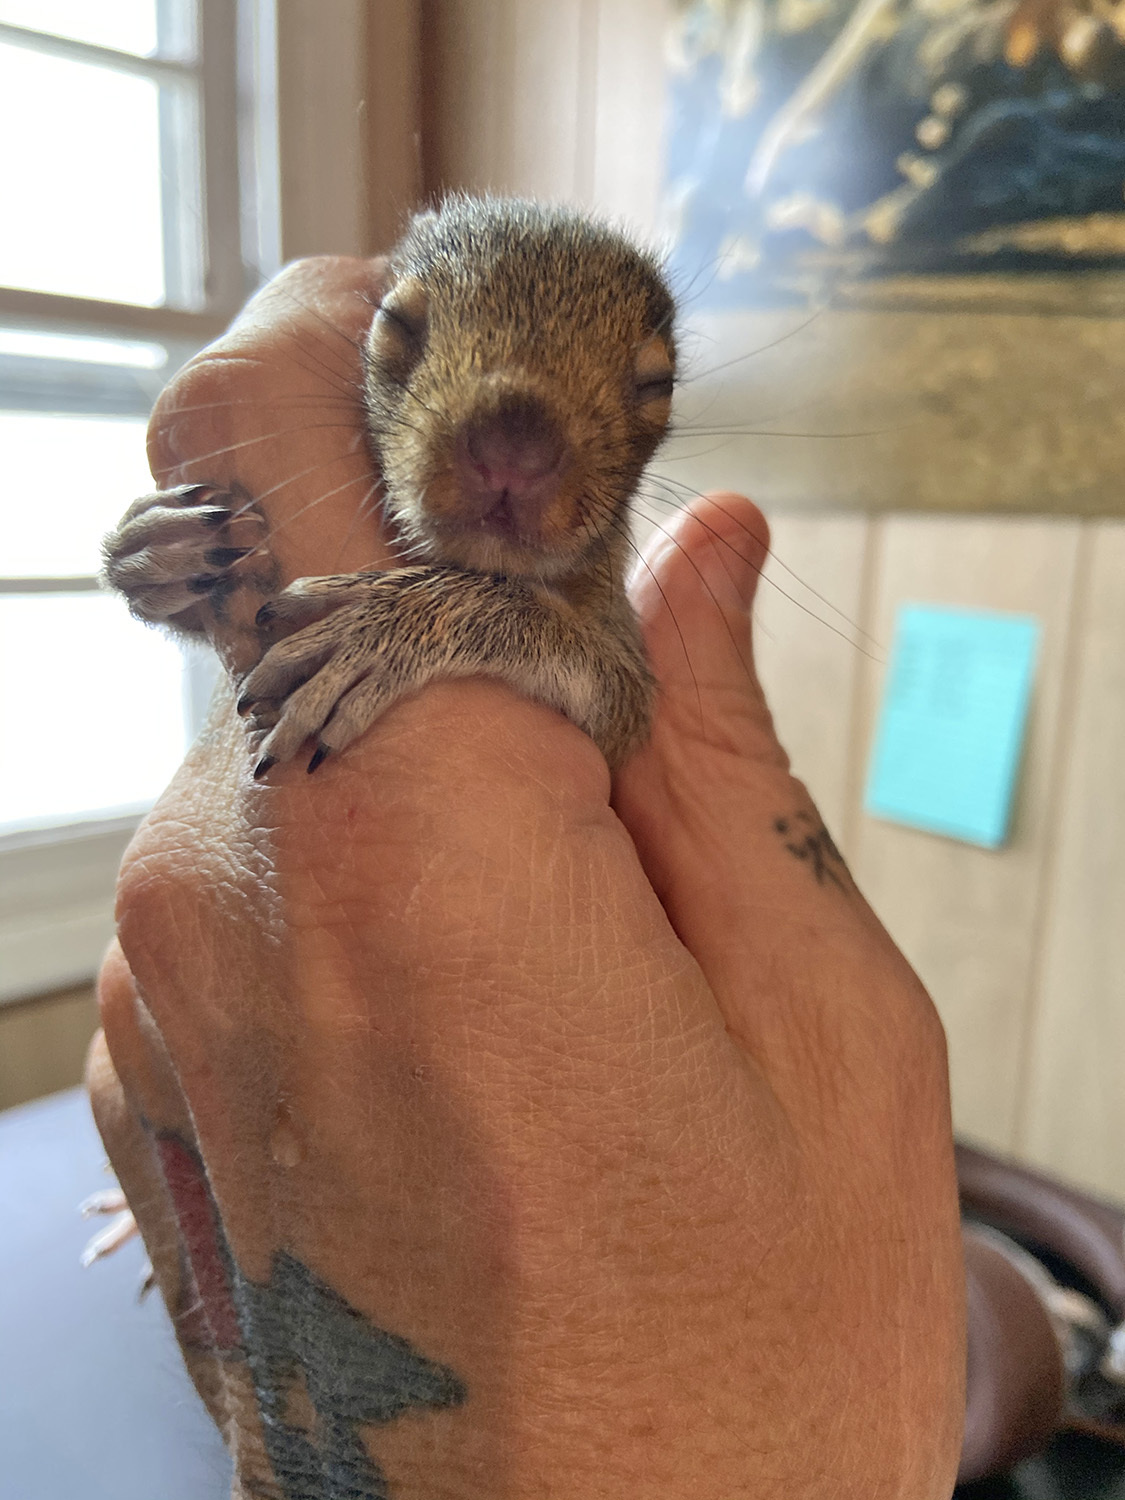 Squrry the squirrel as a baby. COURTESY DELL CULLUM